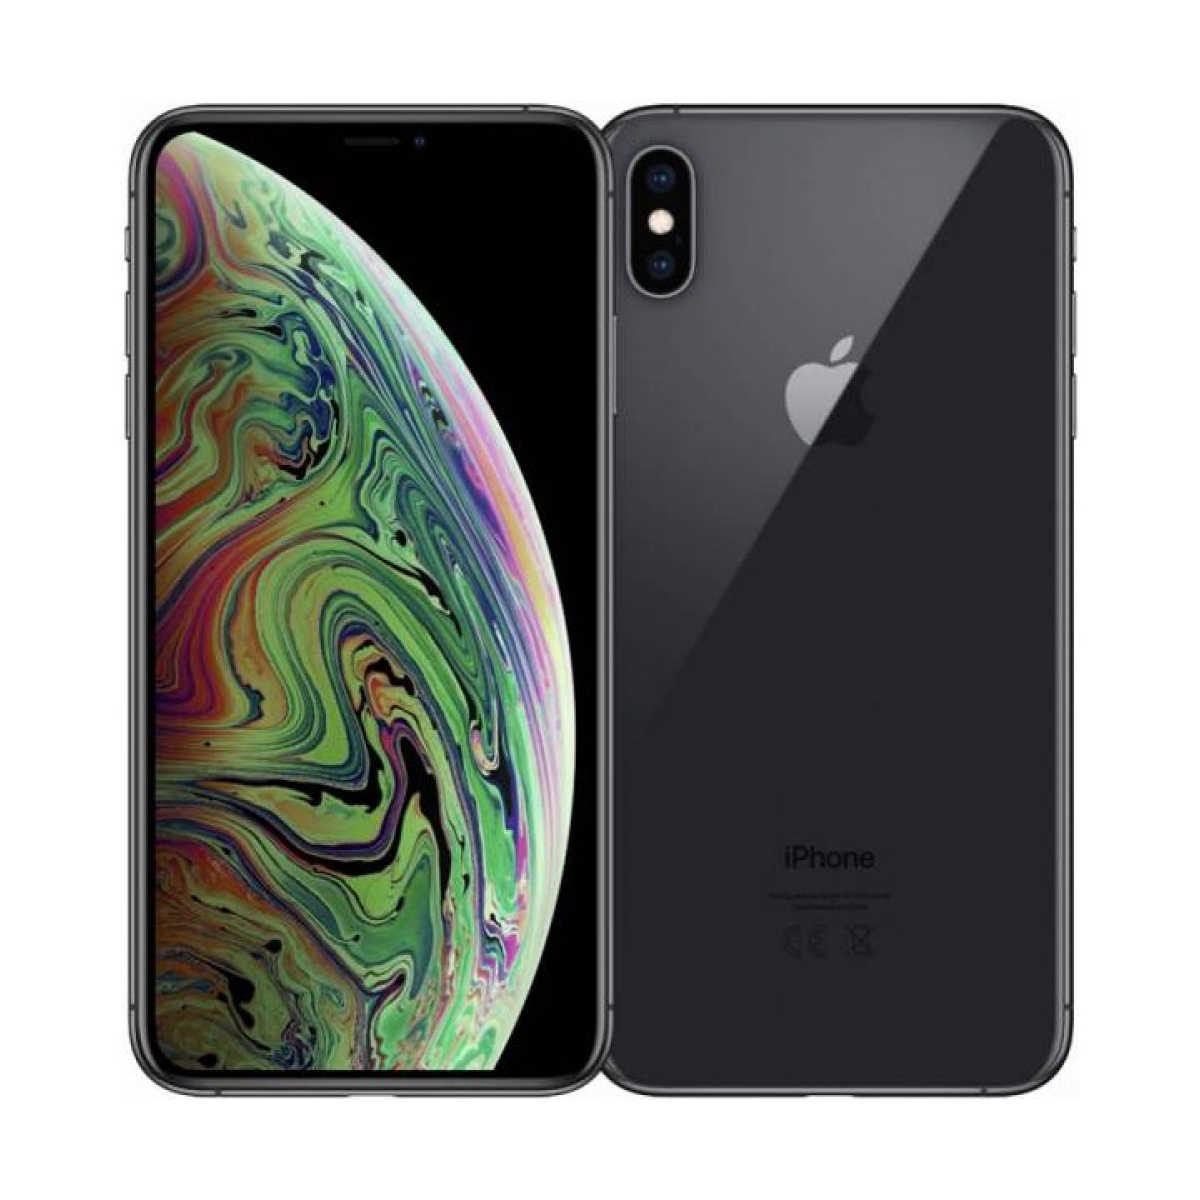 Apple iPhone XS 256GB - Silver with Glass, Case, Power Bank and Watch